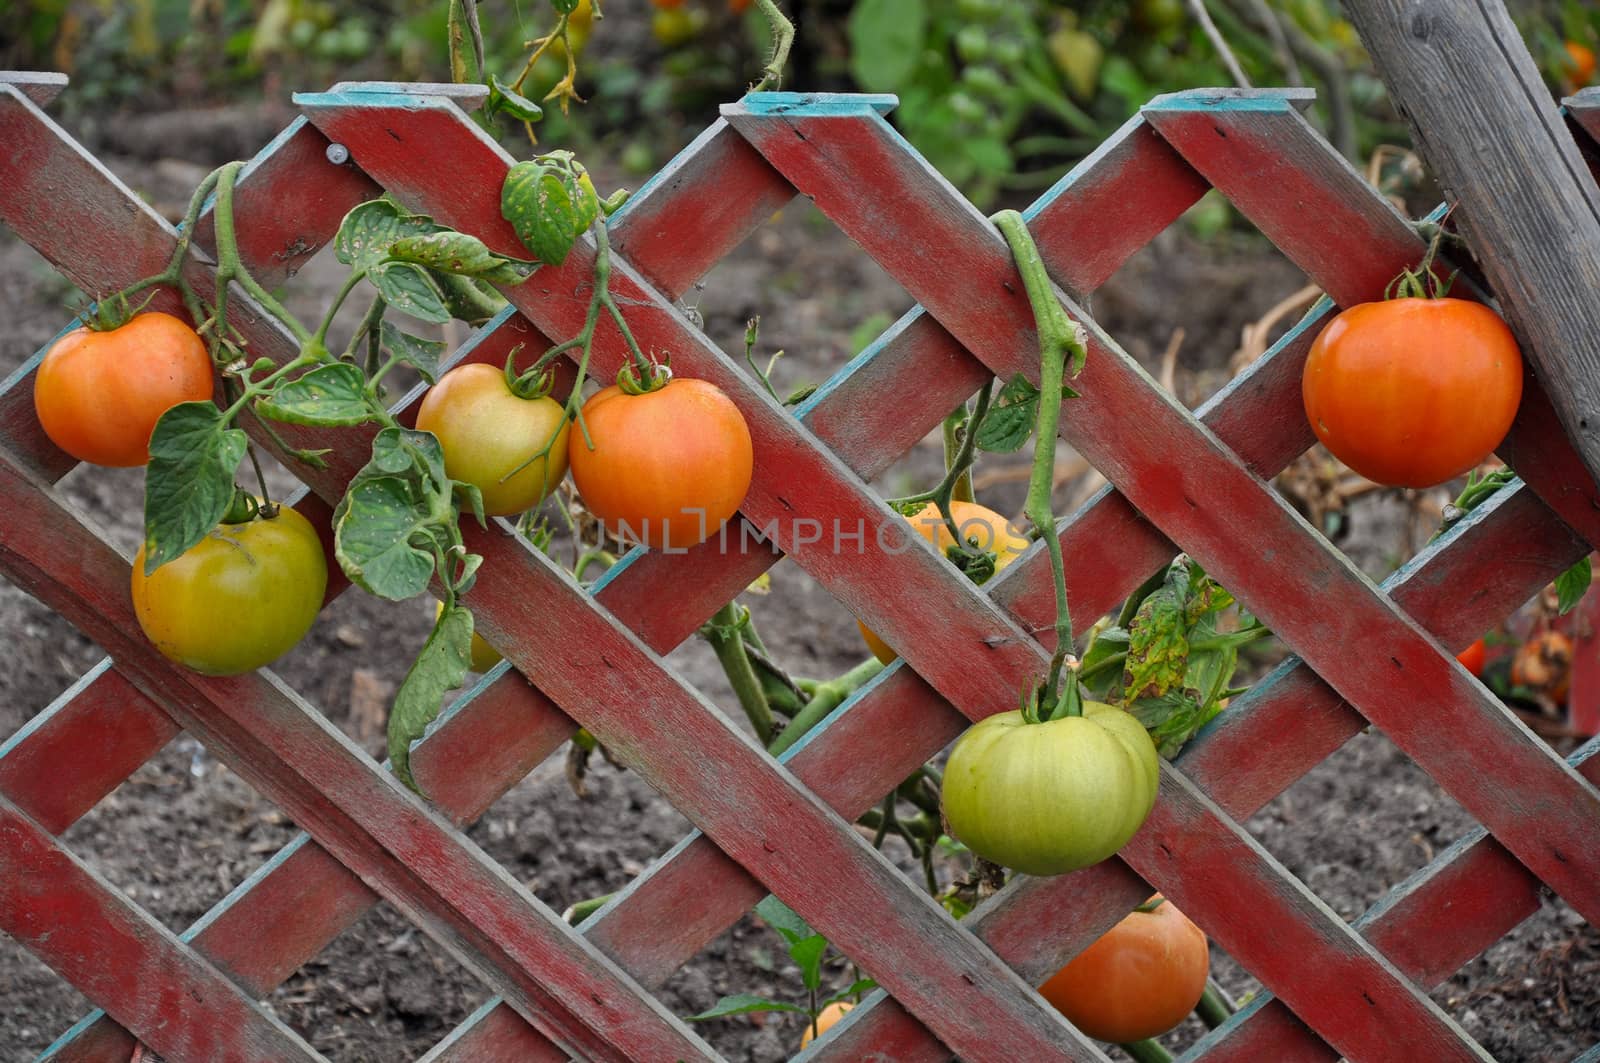 Red and green tomatoes growing on fence ready for harvest